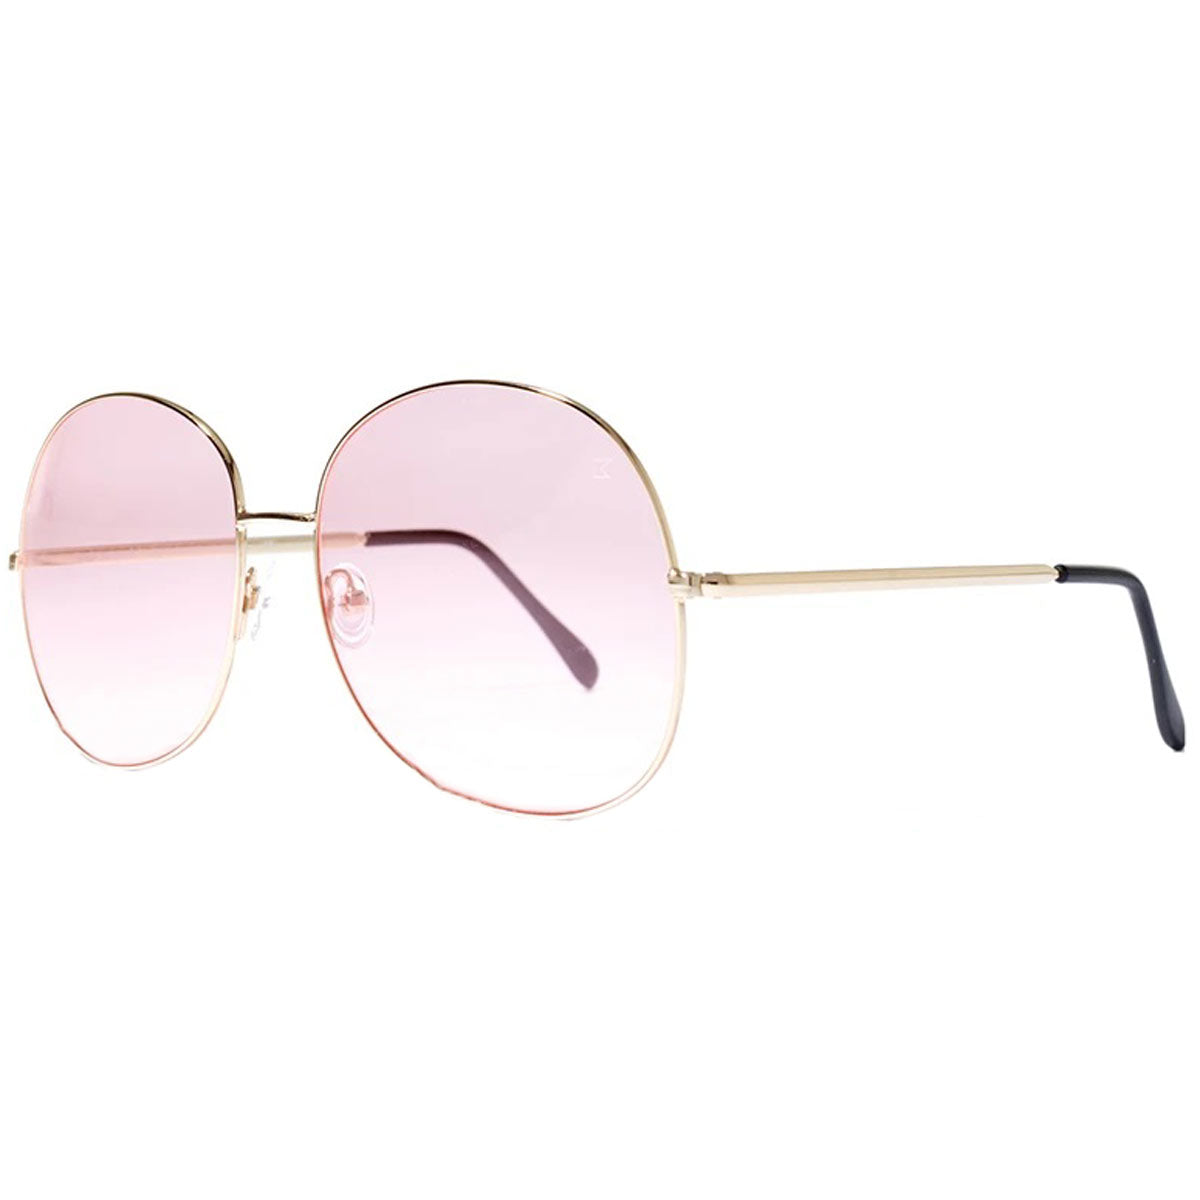 Bob Sdrunk Women's Sunglasses - Milly Gold Frame Pink Lens / MILLY-102R-61-16-145